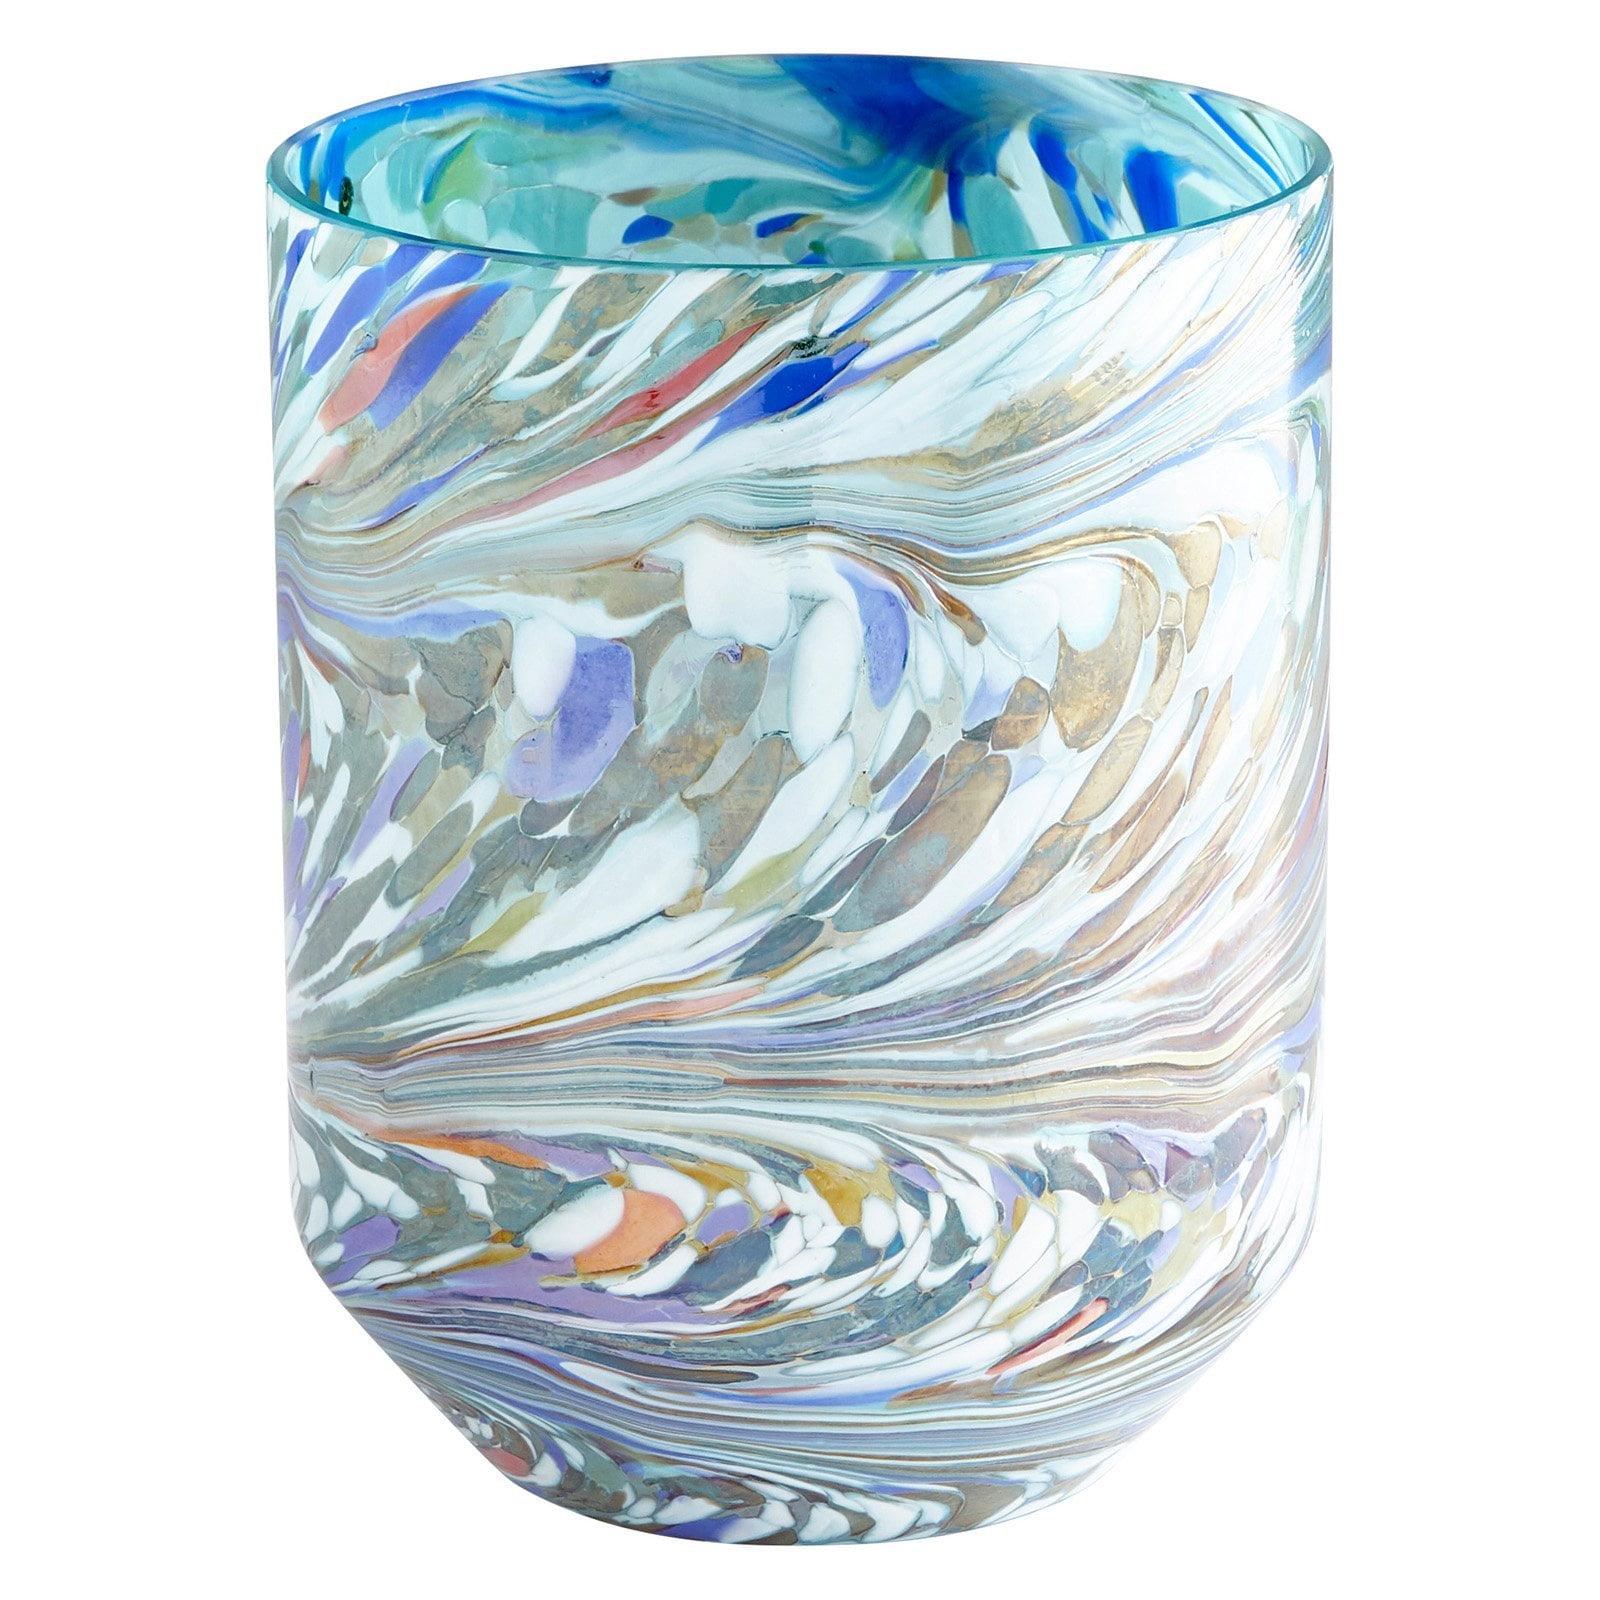 Contemporary Glass Table Vase in Jewel Tones - 7"x9.25"